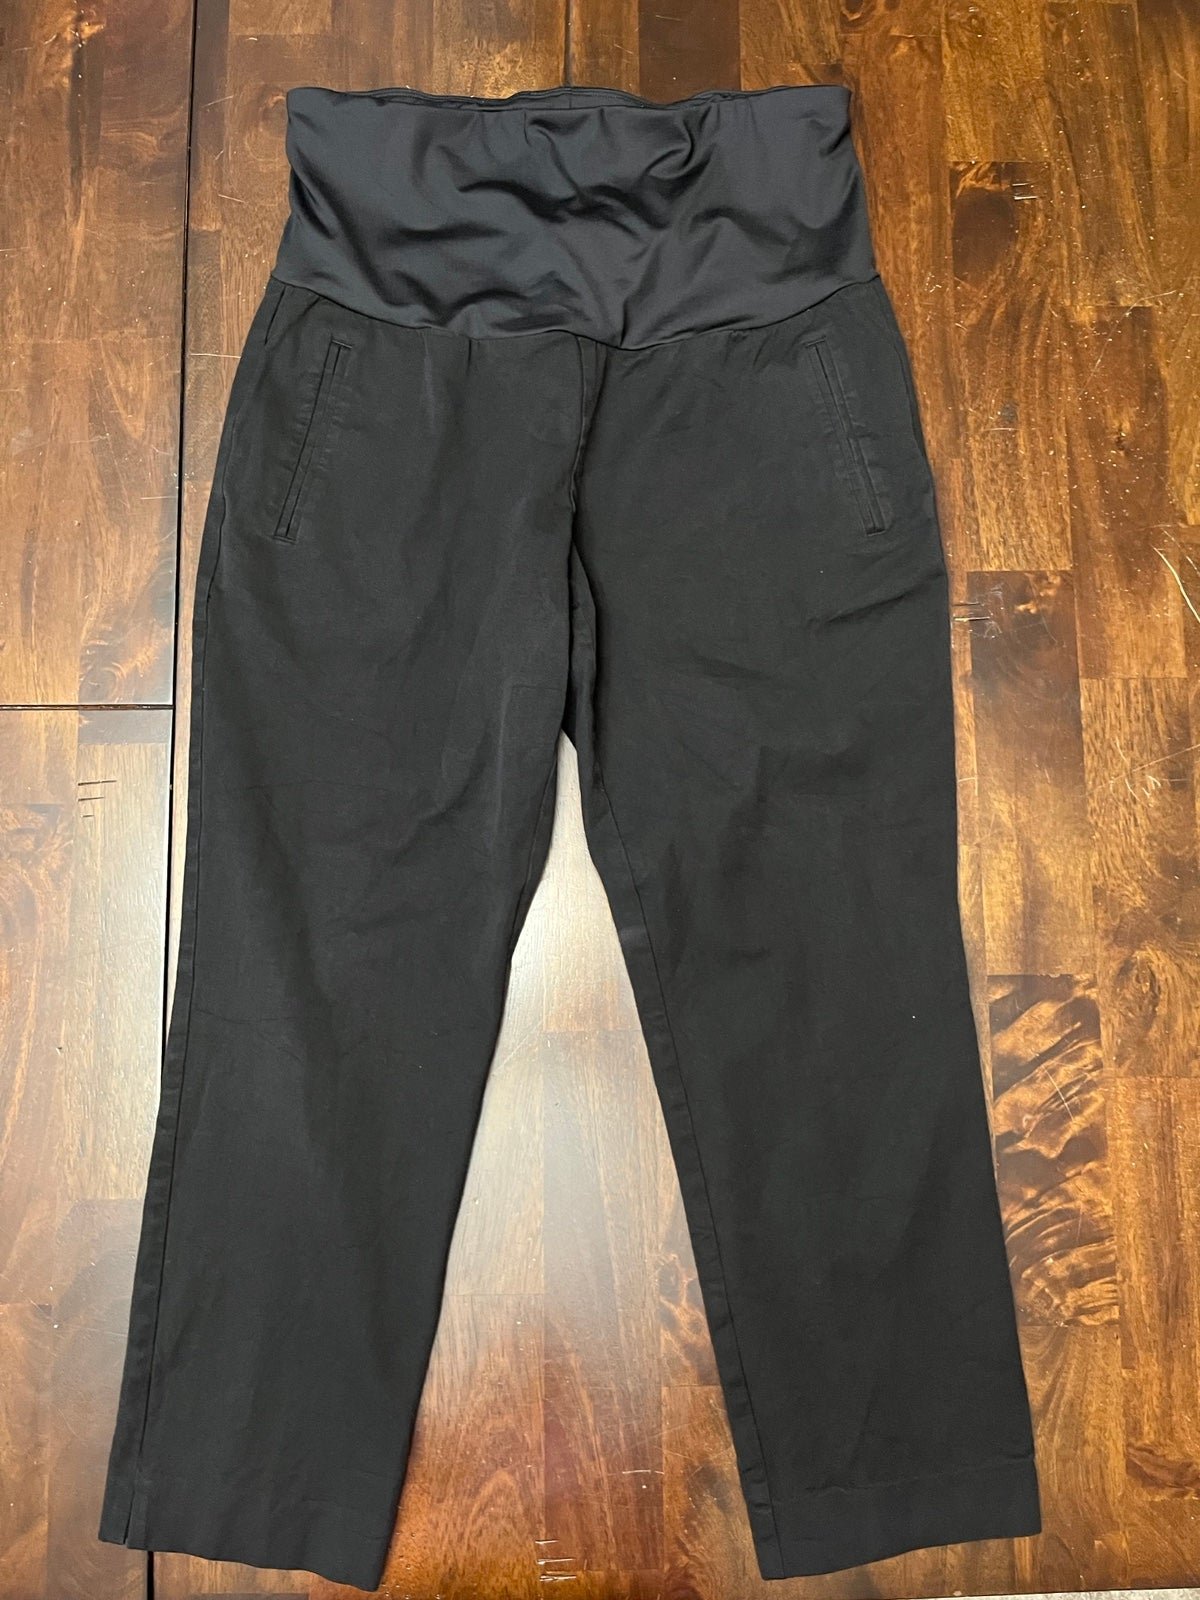 Custom A Pea In The Pod Black Maternity Over Belly Casual Pants Women’s Size L HLVgUBn6L Discount